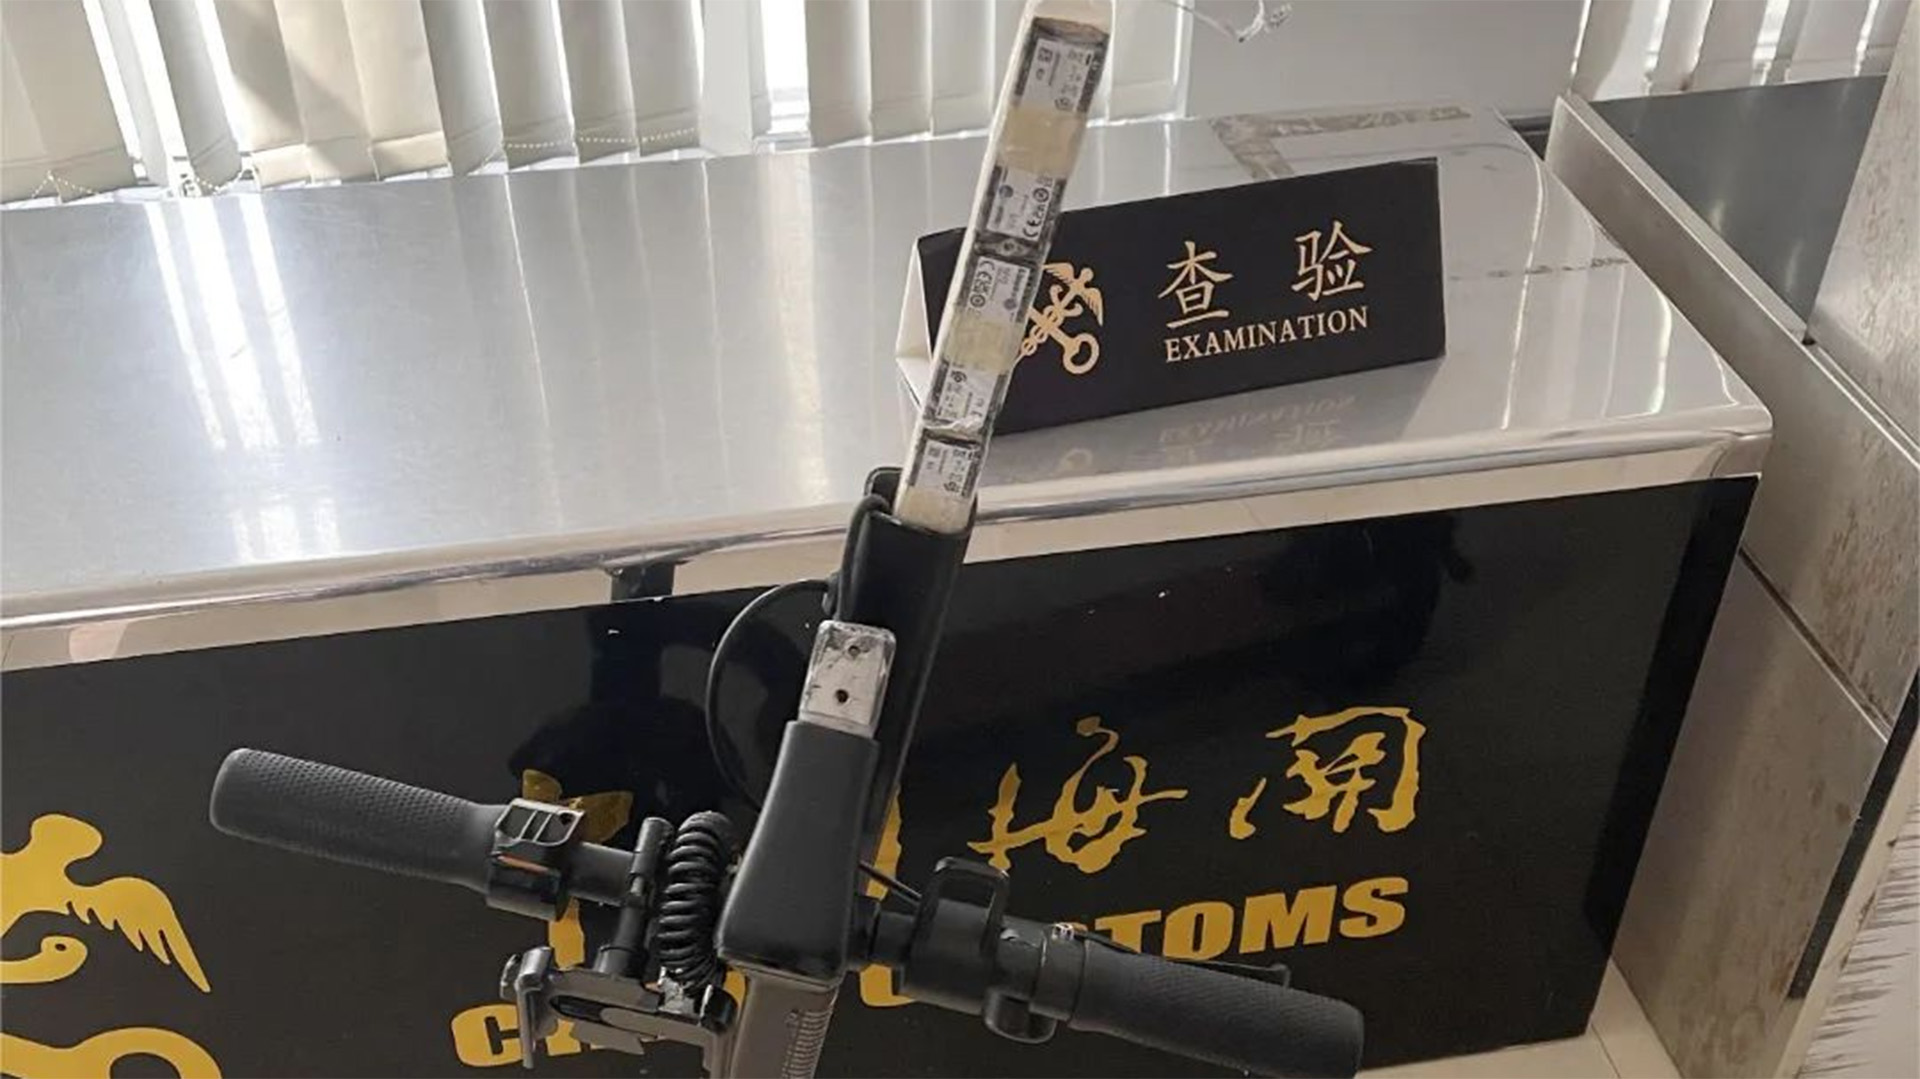 Qingmao Customs discovers an e-scooter filled with SSDs